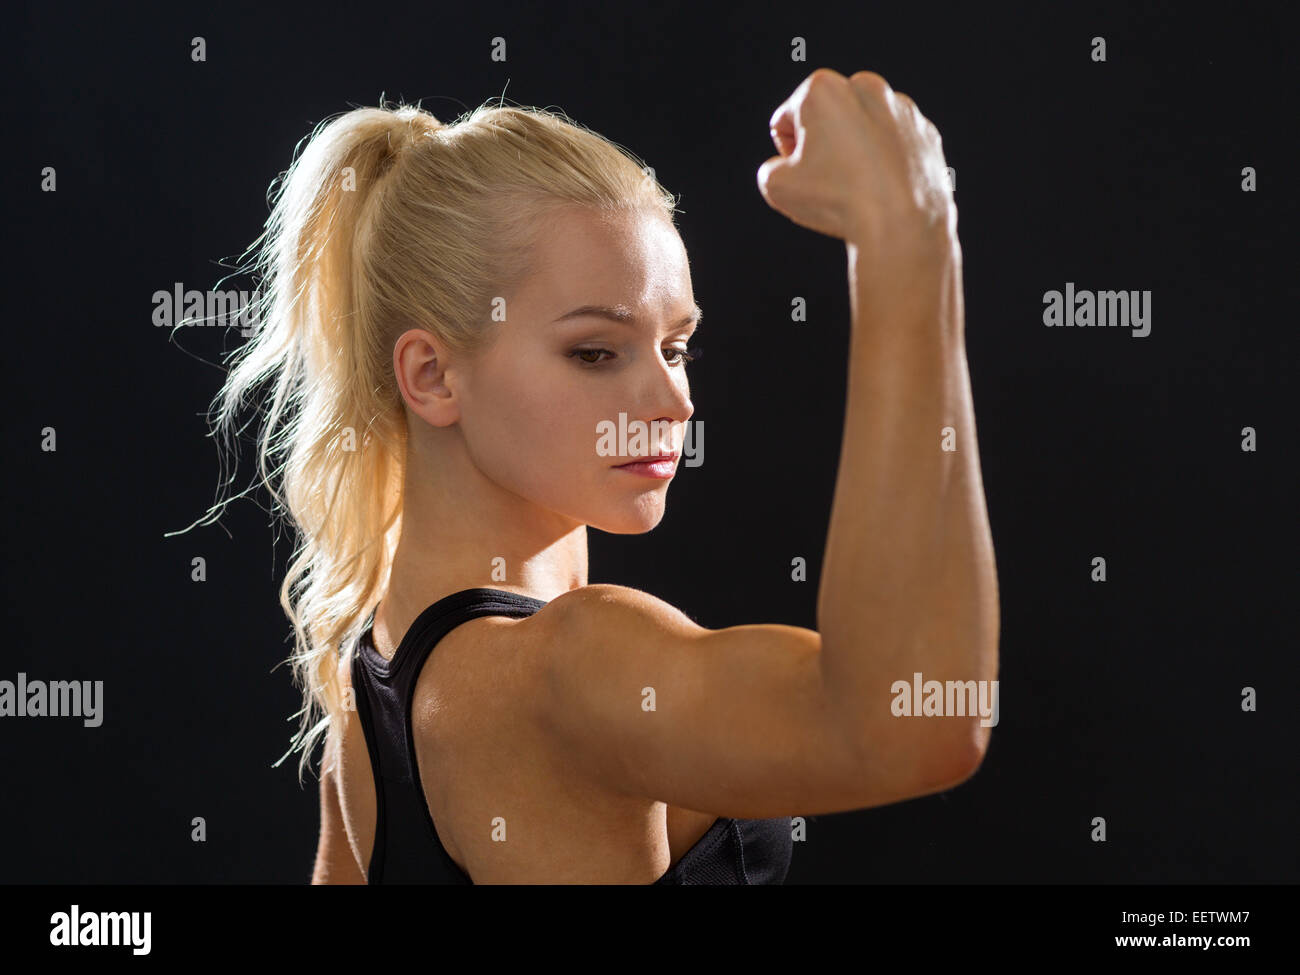 close up of athletic woman flexing her biceps Stock Photo